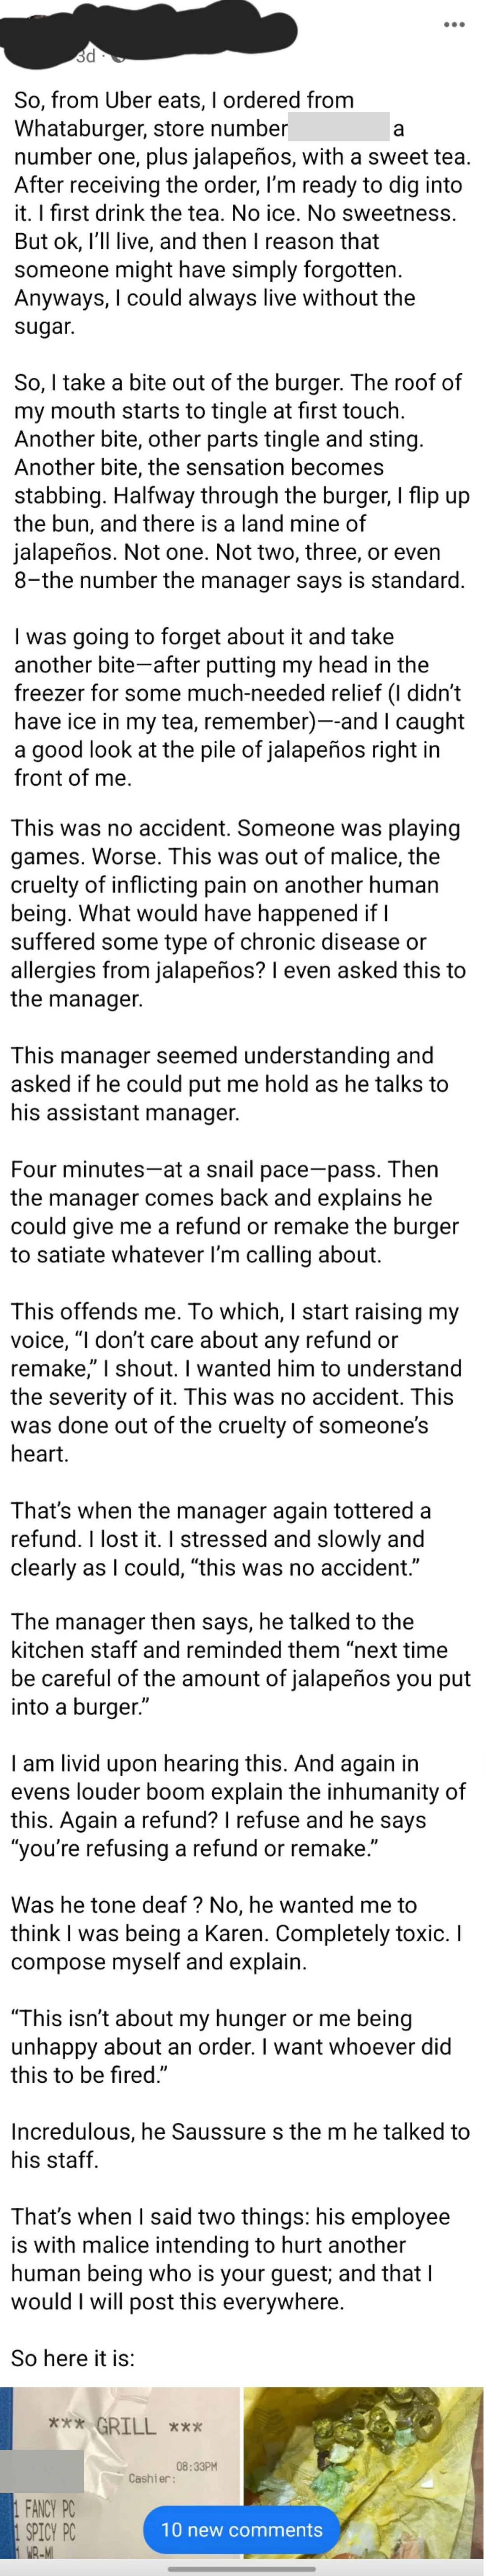 Someone goes on a long rant about how a fast food worker was trying to injure them because of how many jalapenos were on their burger, when they asked for jalapenos; the person making the post tried to get the worker fired